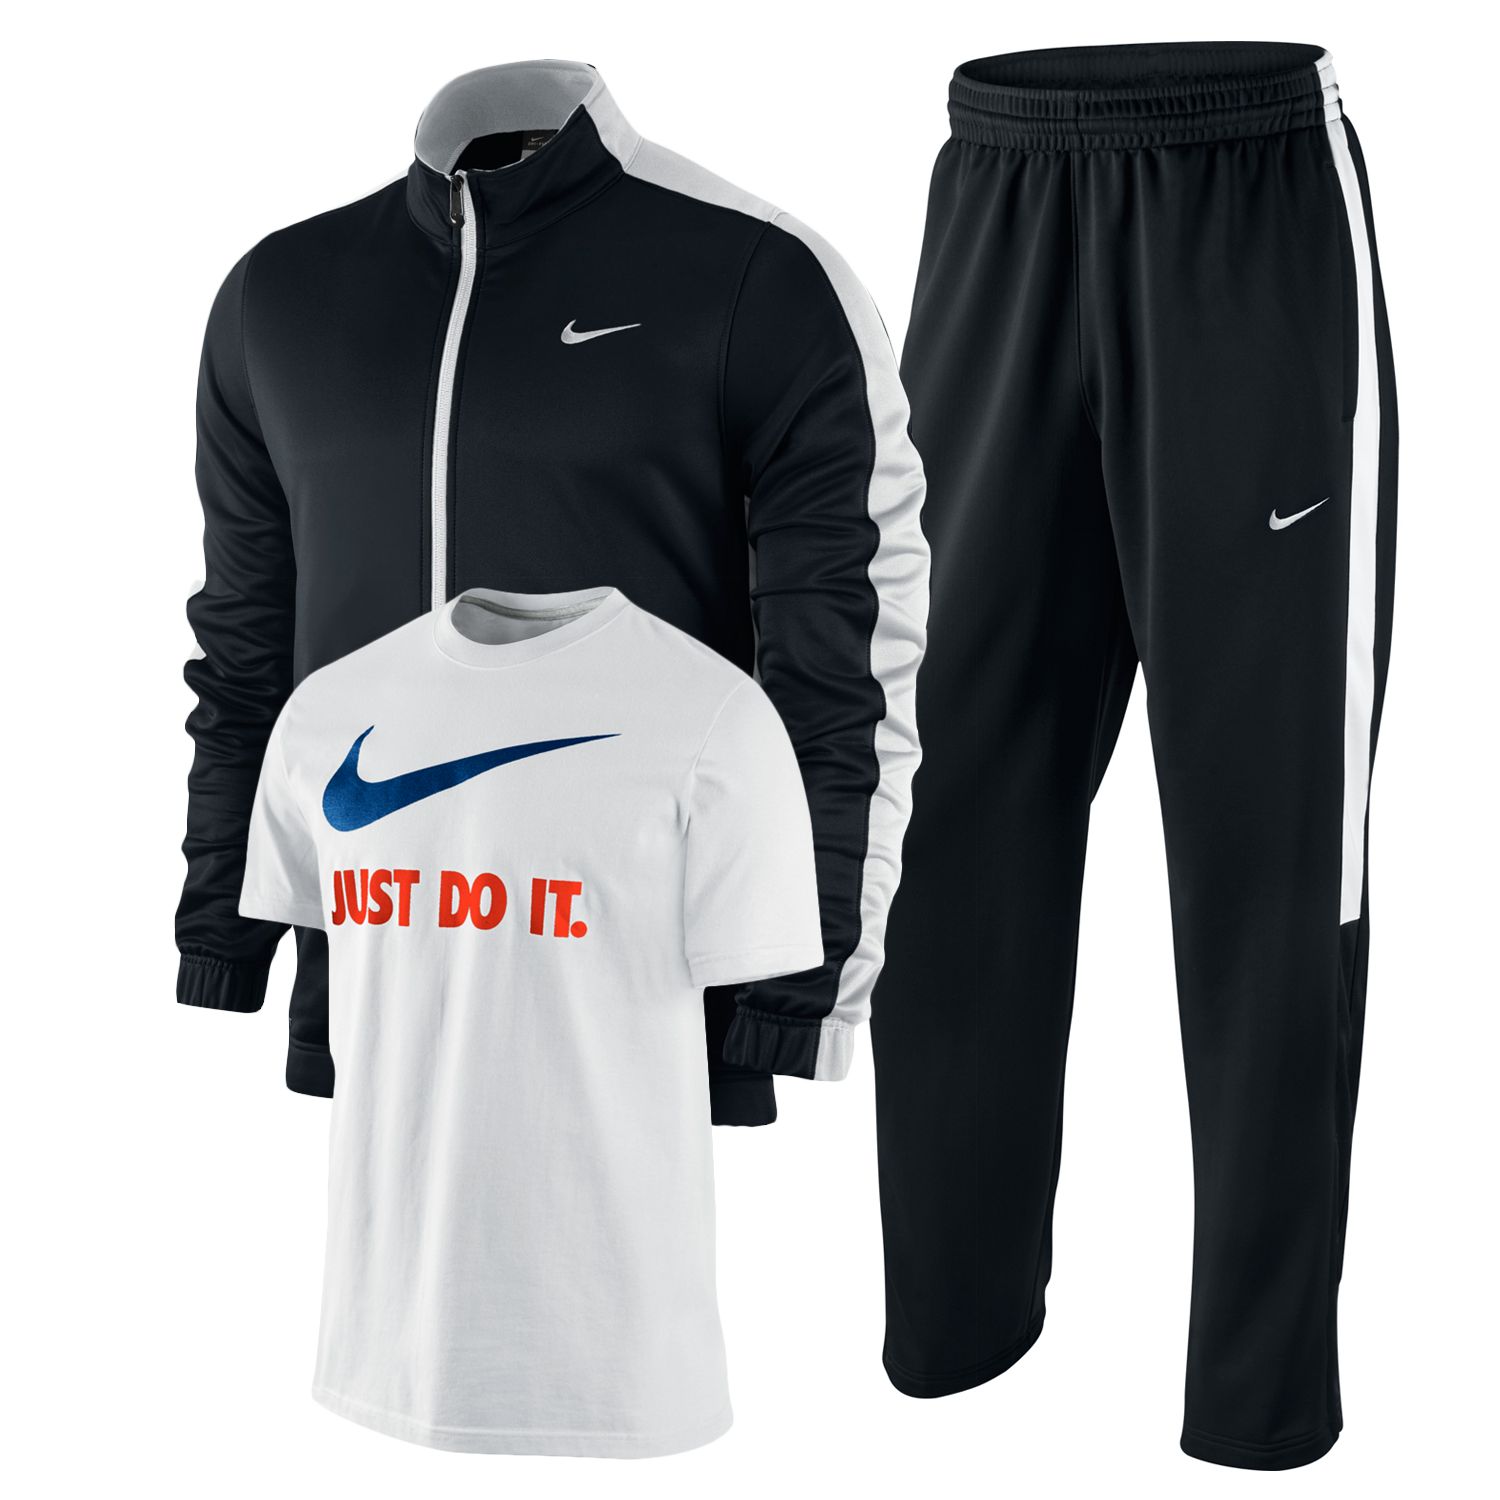 mens nike jogging outfits